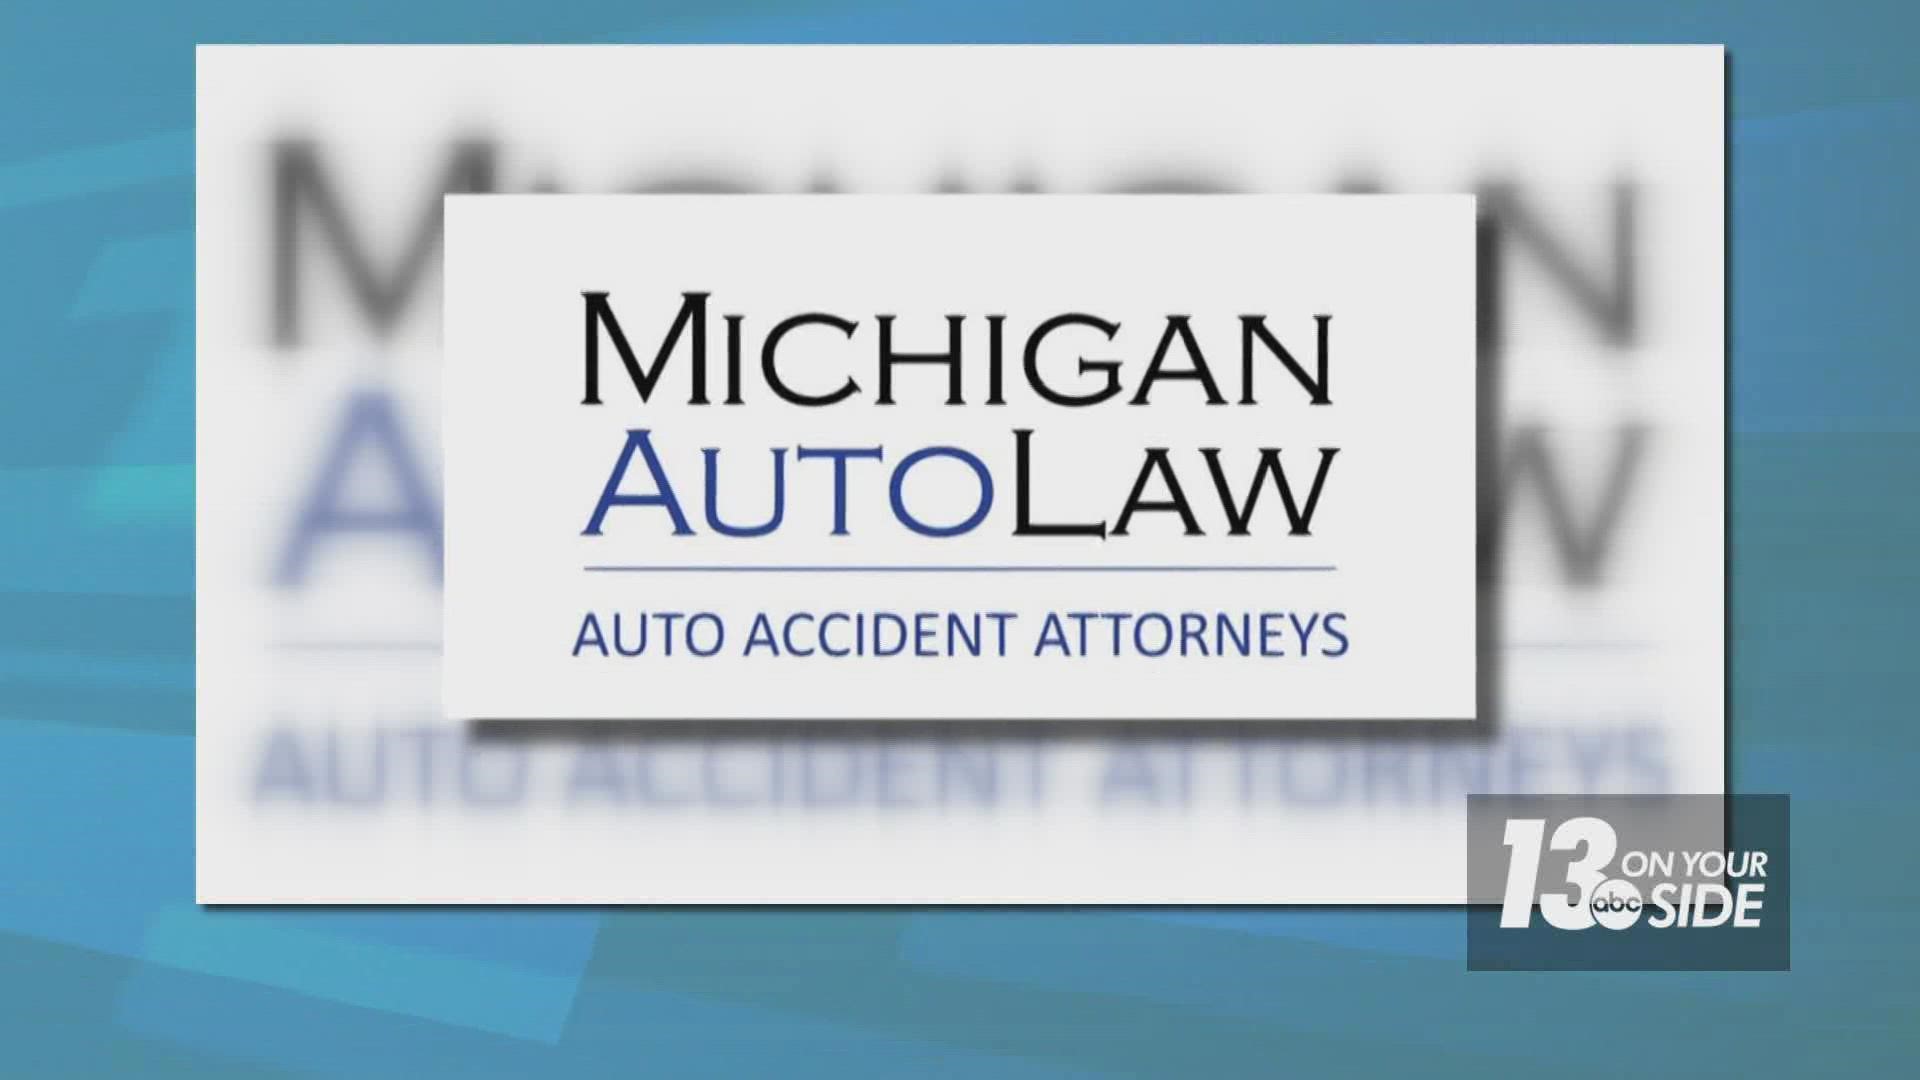 Michigan Auto Law Attorney Brandon Hewitt joined us to give safety reminders about back-to-school driving.